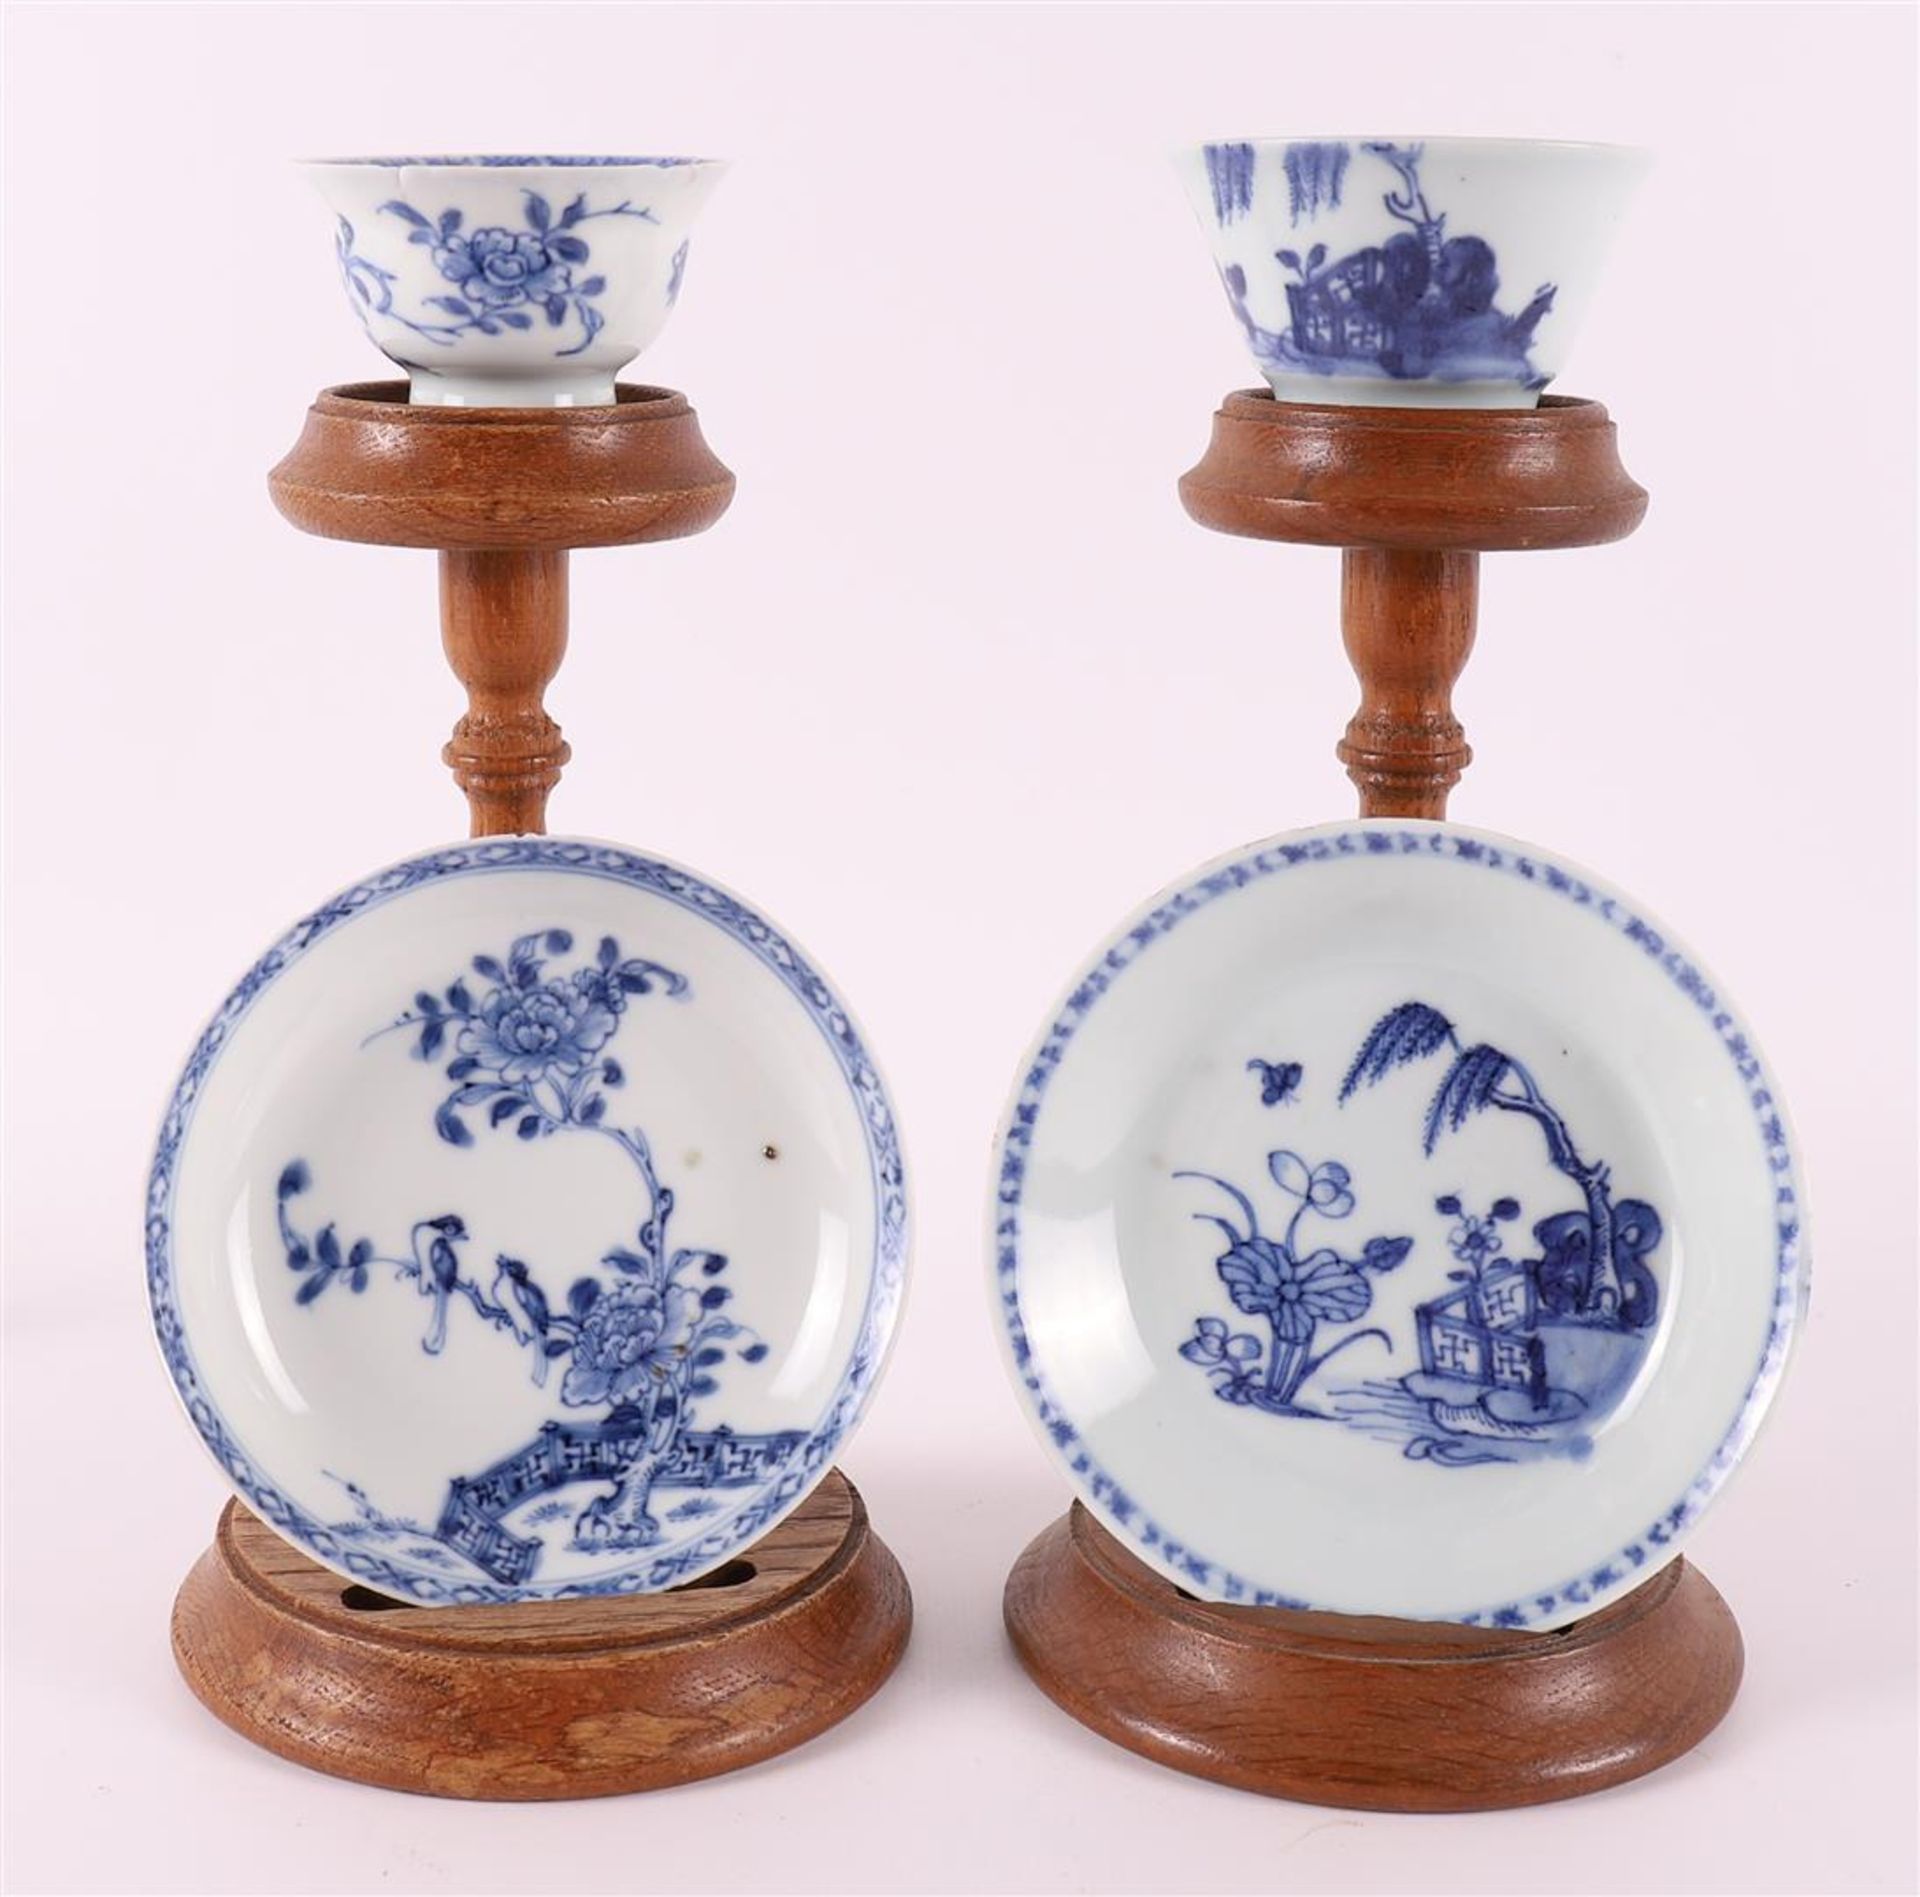 Two blue/white porcelain cups and saucers, China, Qianlong, 18th century. Blue underglaze decor of